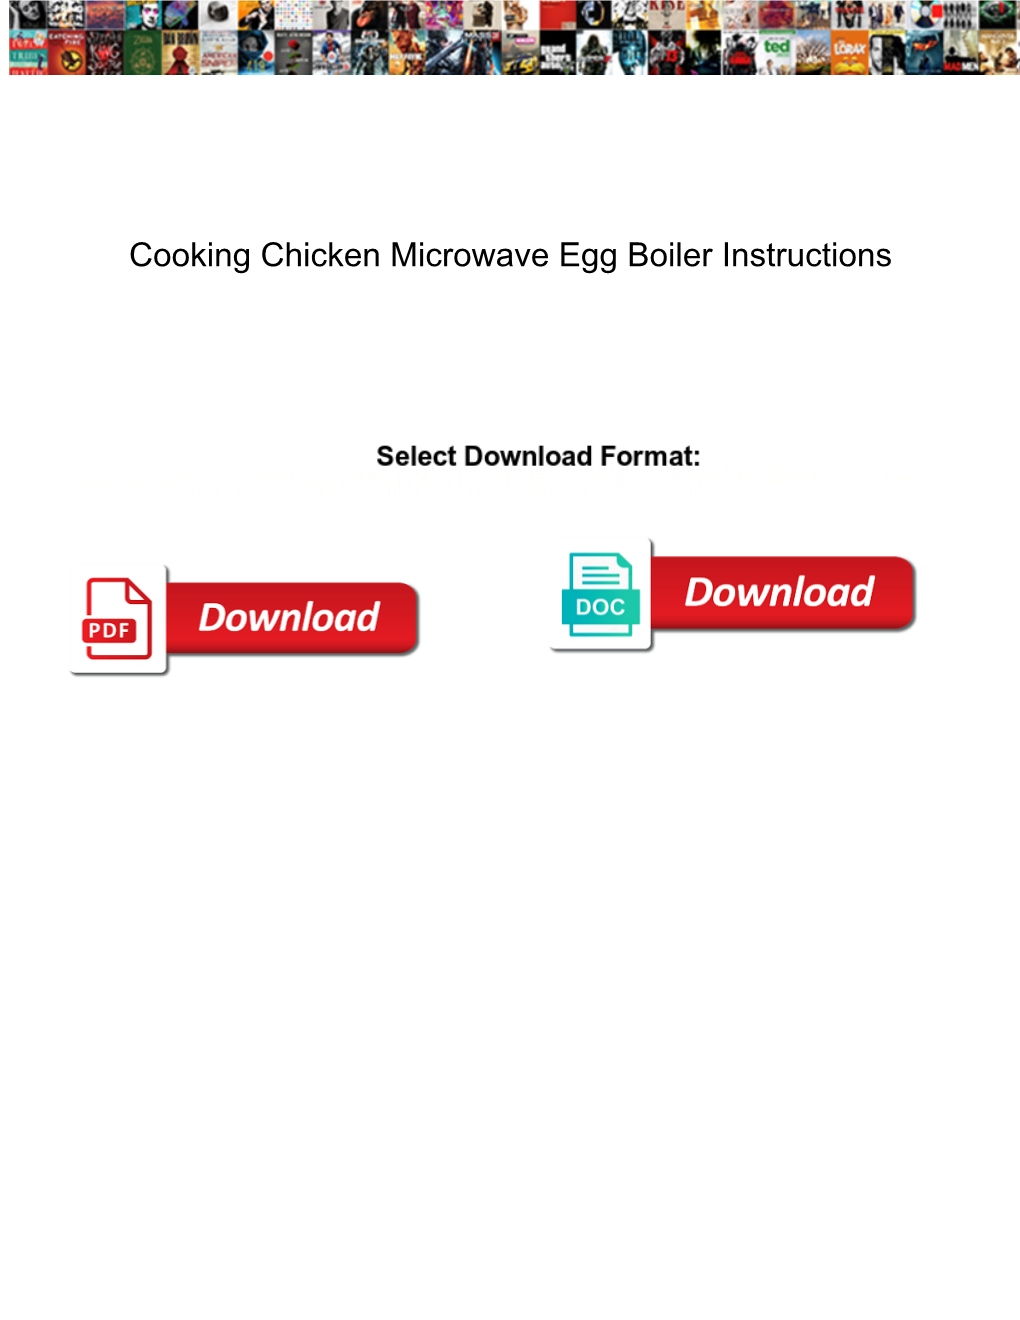 Cooking Chicken Microwave Egg Boiler Instructions